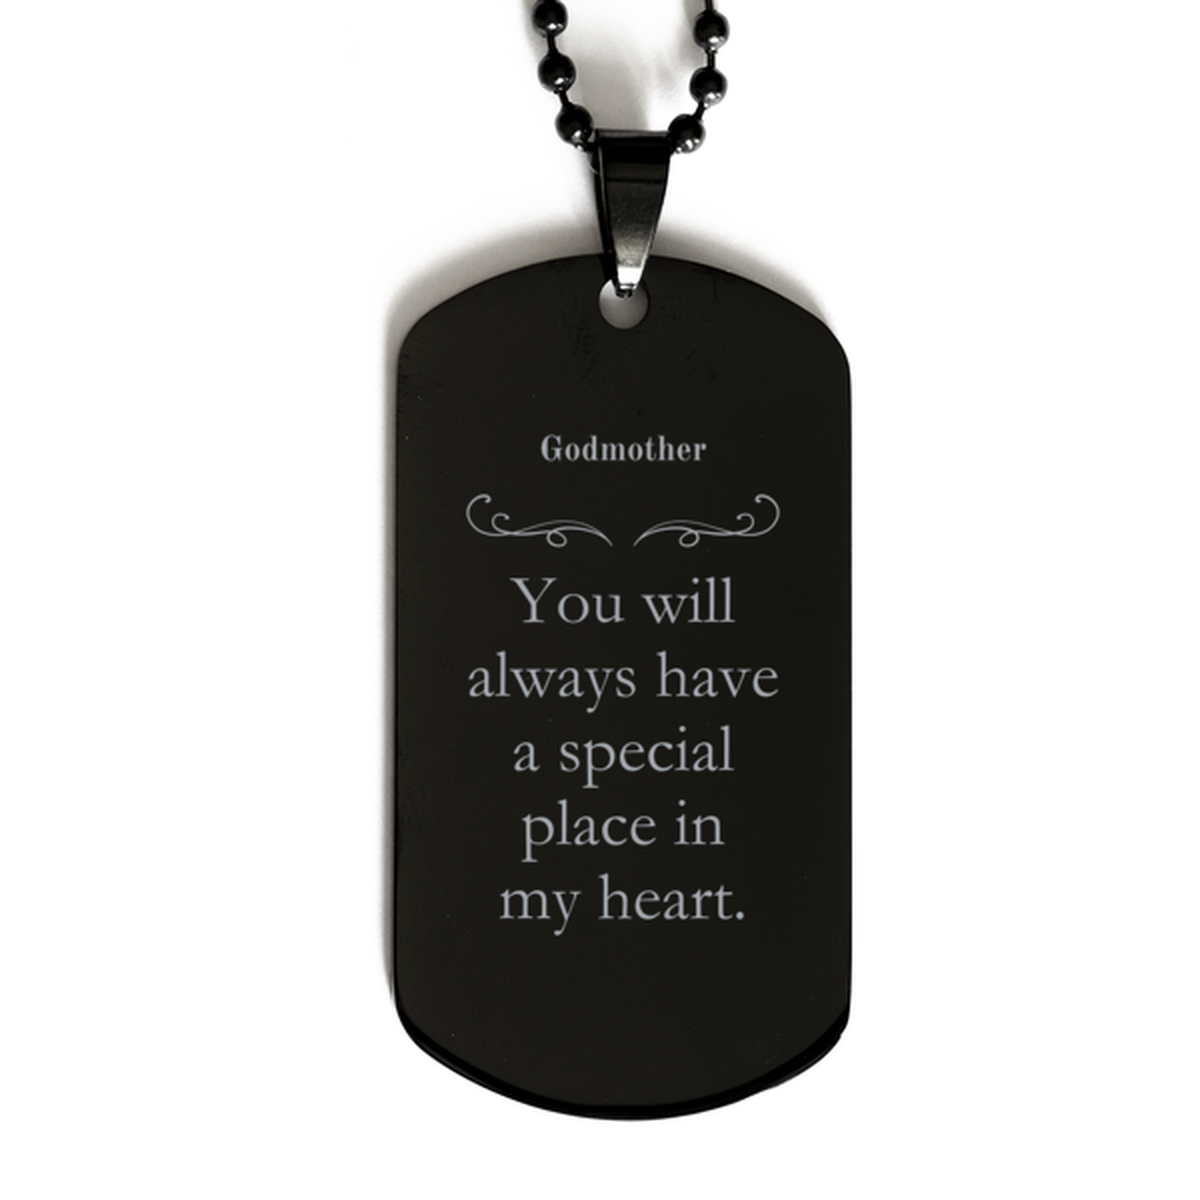 Black Dog Tag Godmother Engraved Special Place in Heart Inspirational Gift for Christmas Birthday Graduation